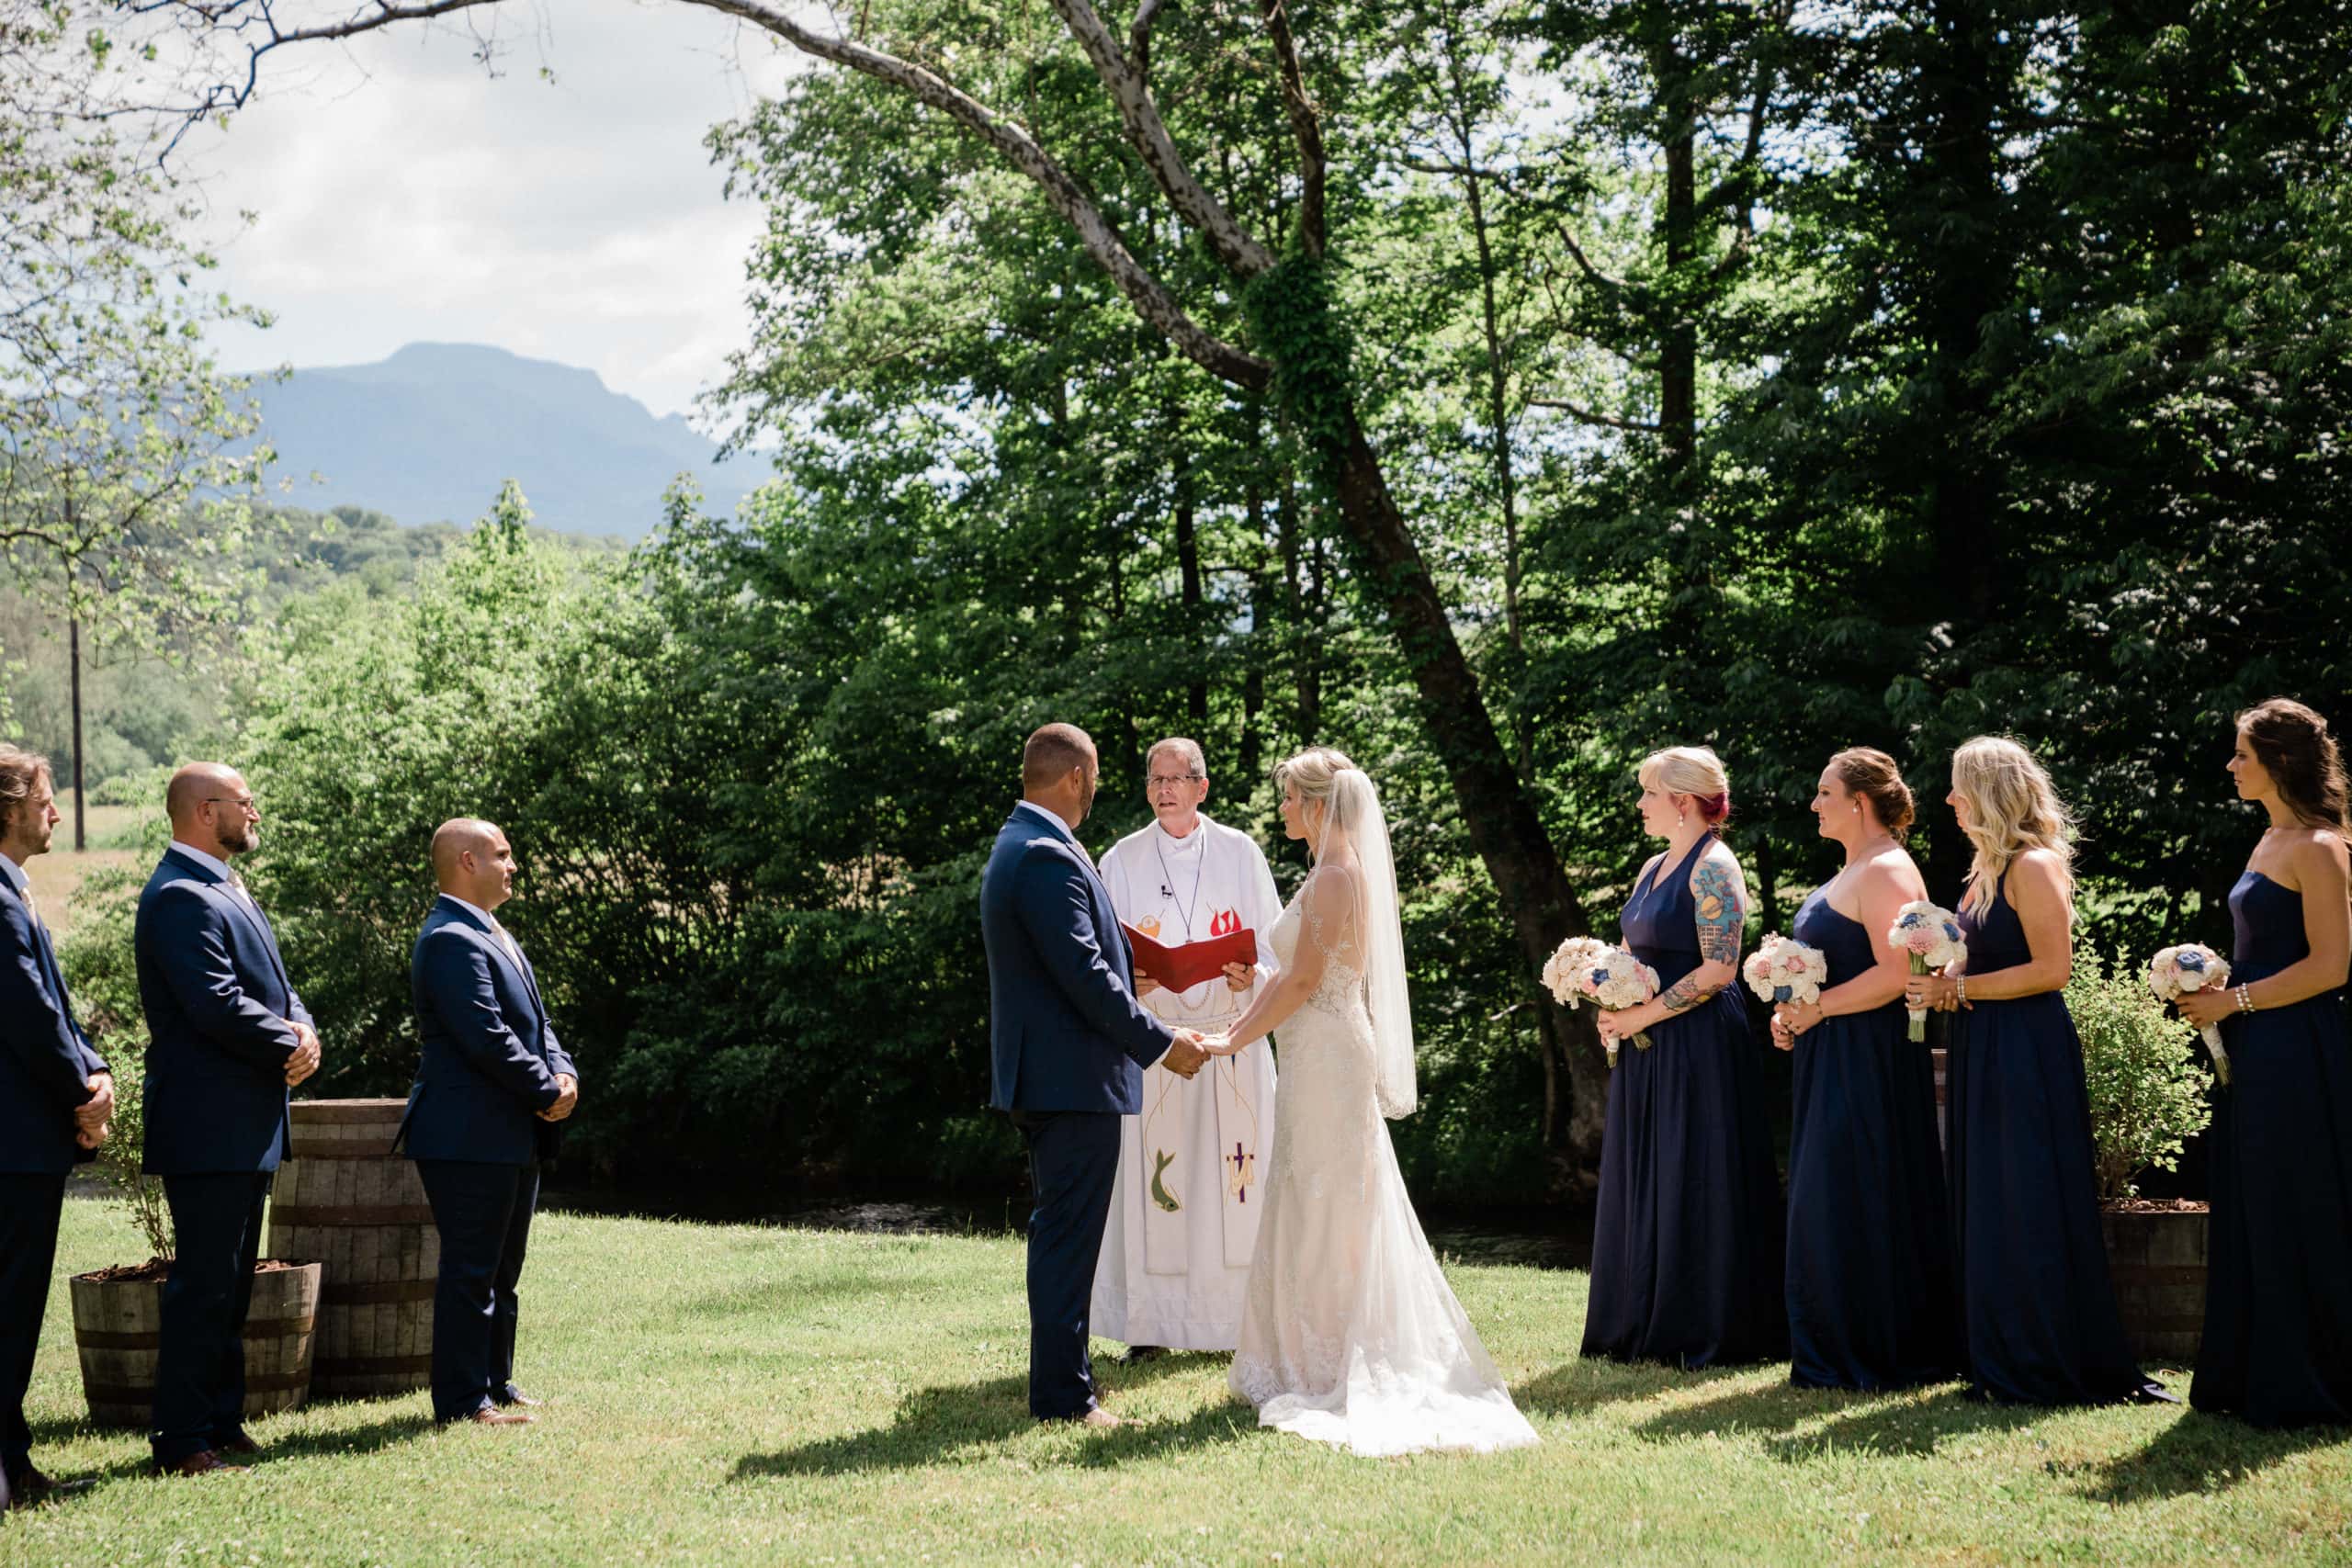 Wedding Ceremony on green grass with Granfather Mountain in the background